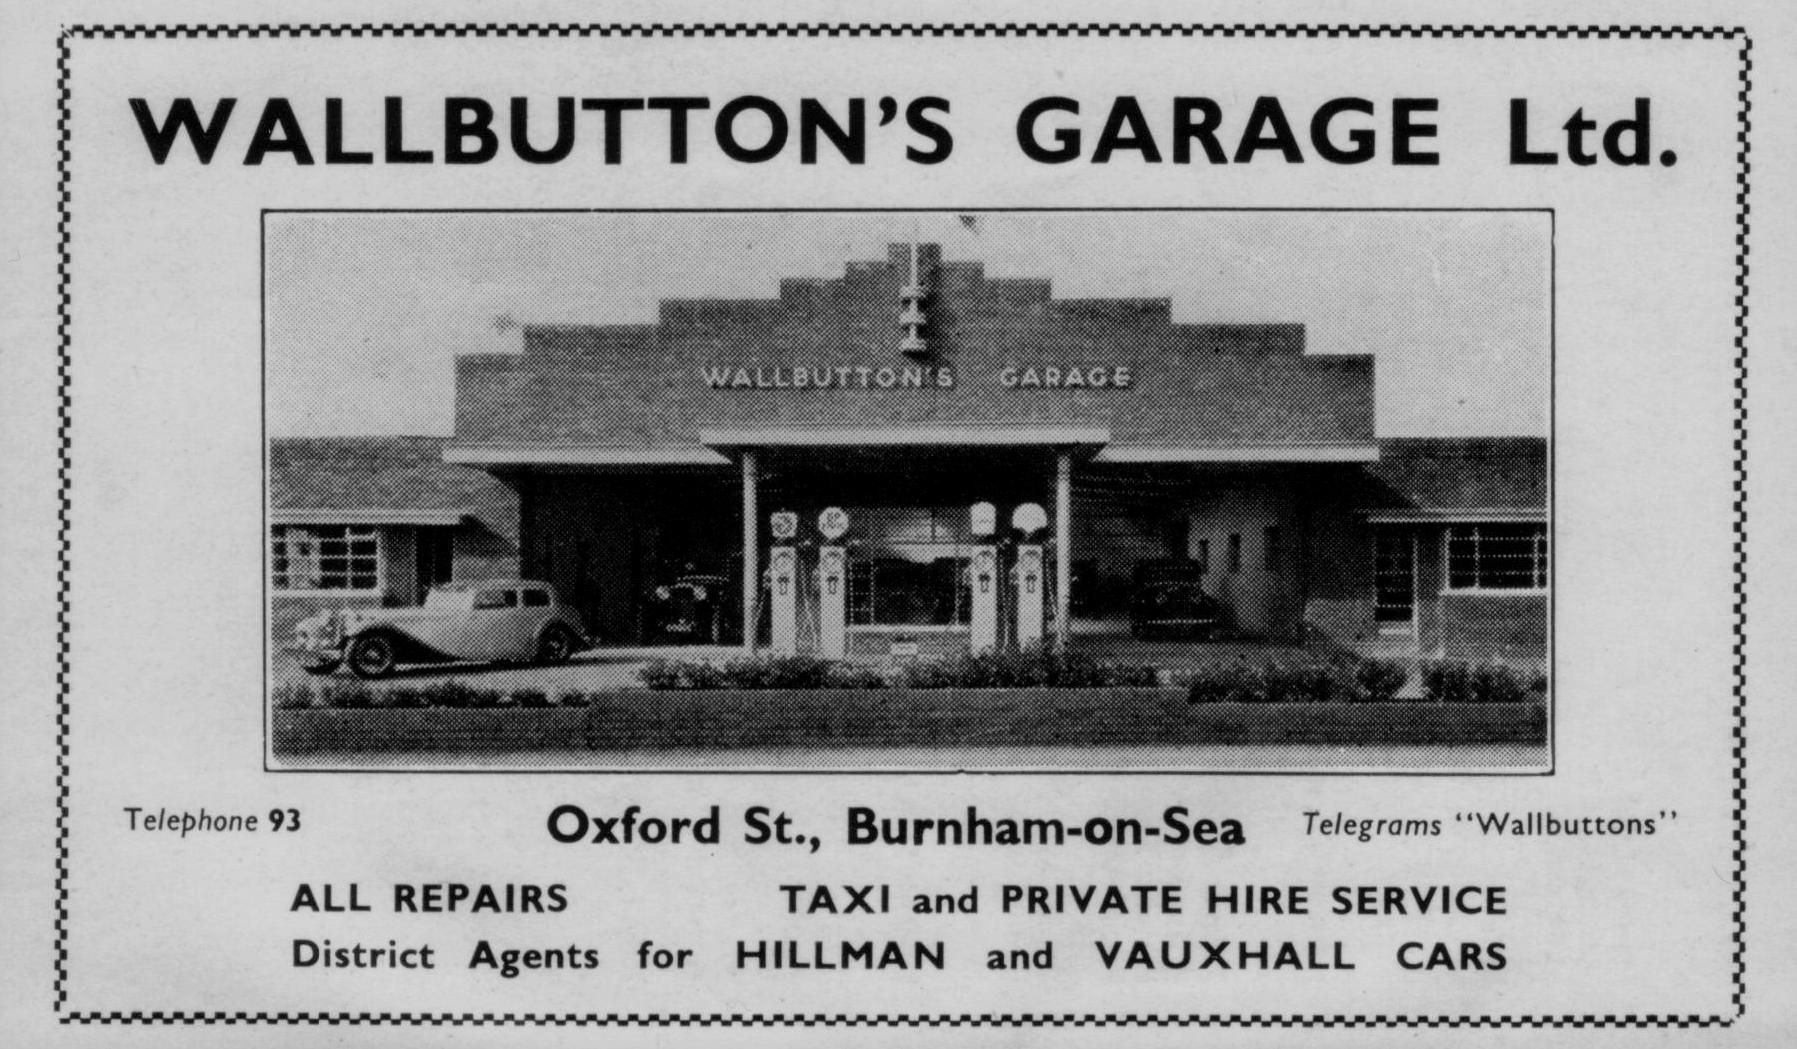 Advert from an early Burham Brochure. Note the telephone number.